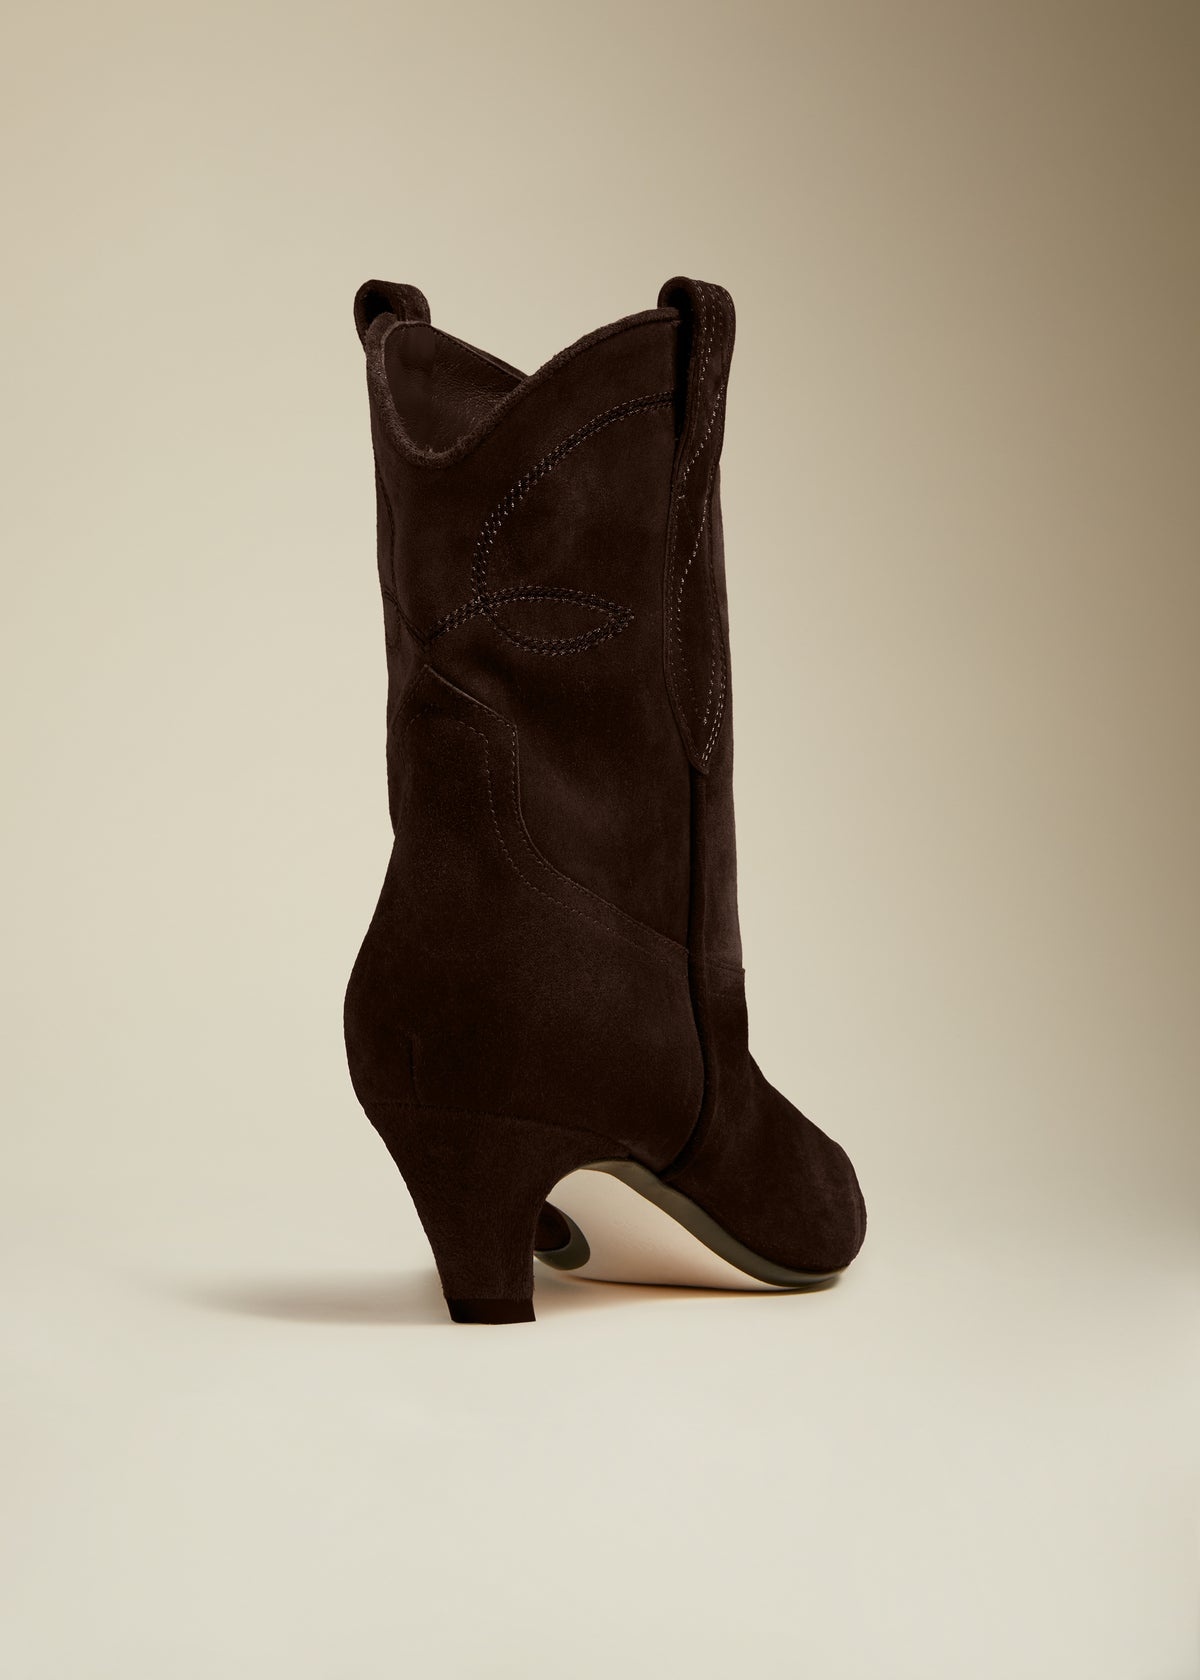 The Dallas Ankle Boot in Coffee Suede - 3